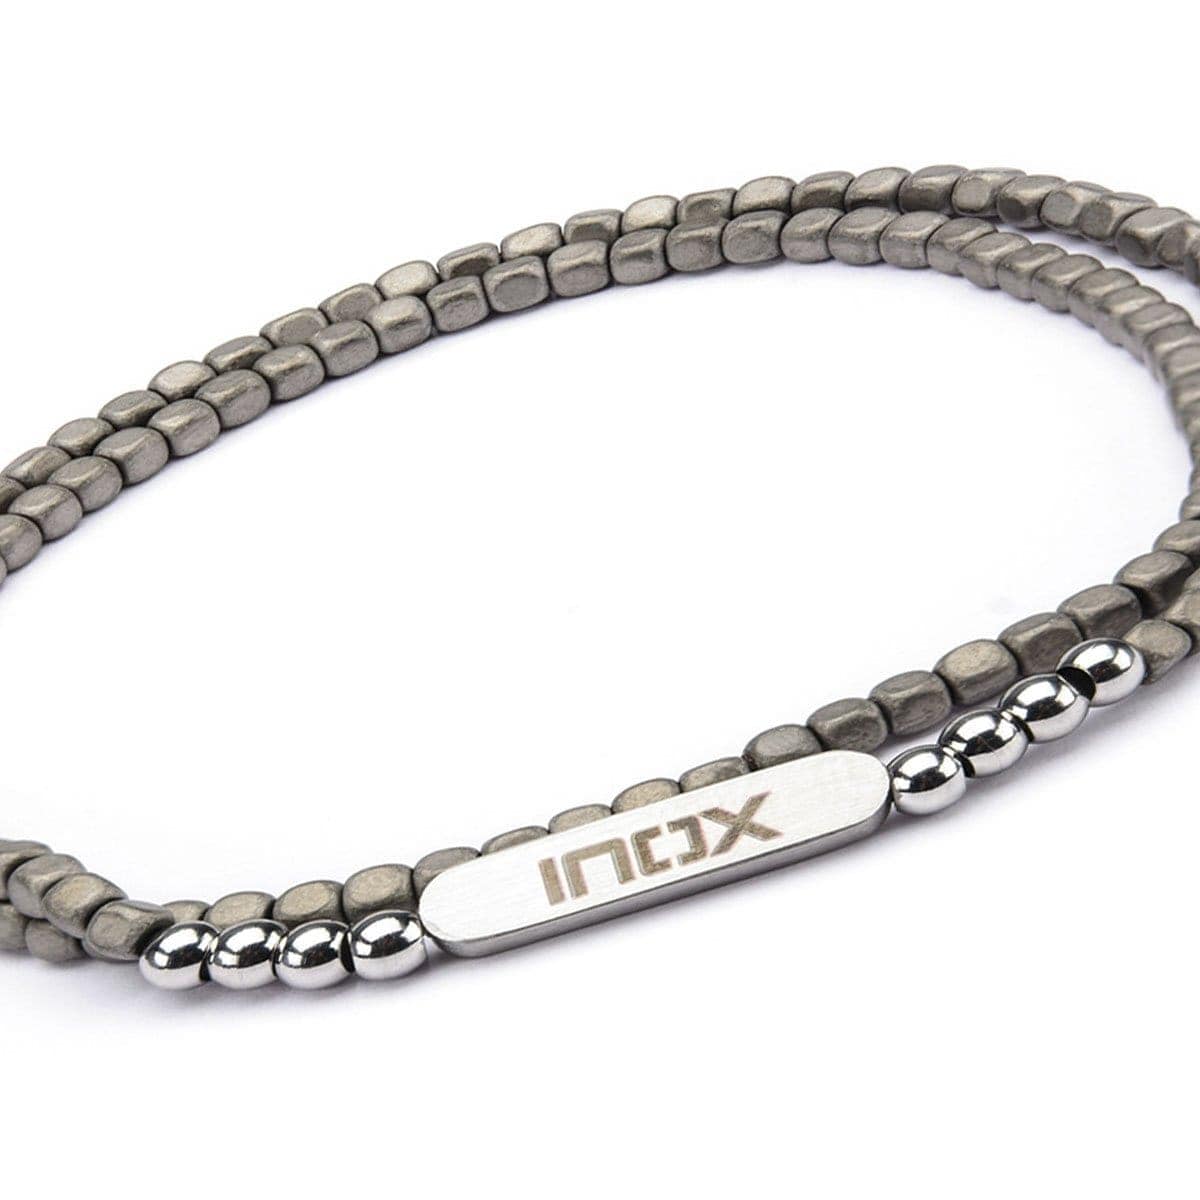 INOX JEWELRY Bracelets Silver Stainless Steel with Gray Hematite 6mm Cube Bead Stackable Bracelet BR621